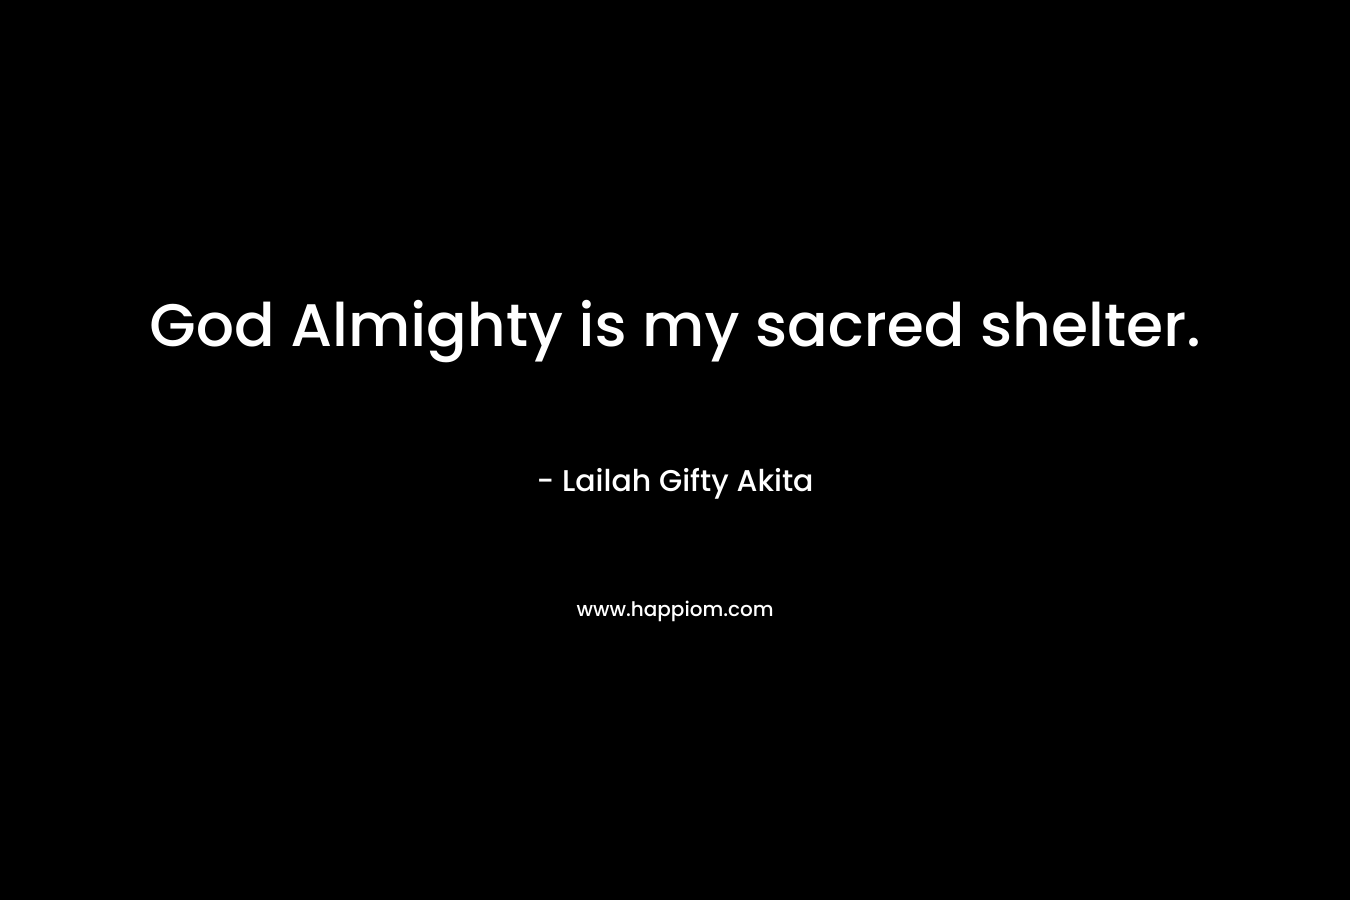 God Almighty is my sacred shelter.